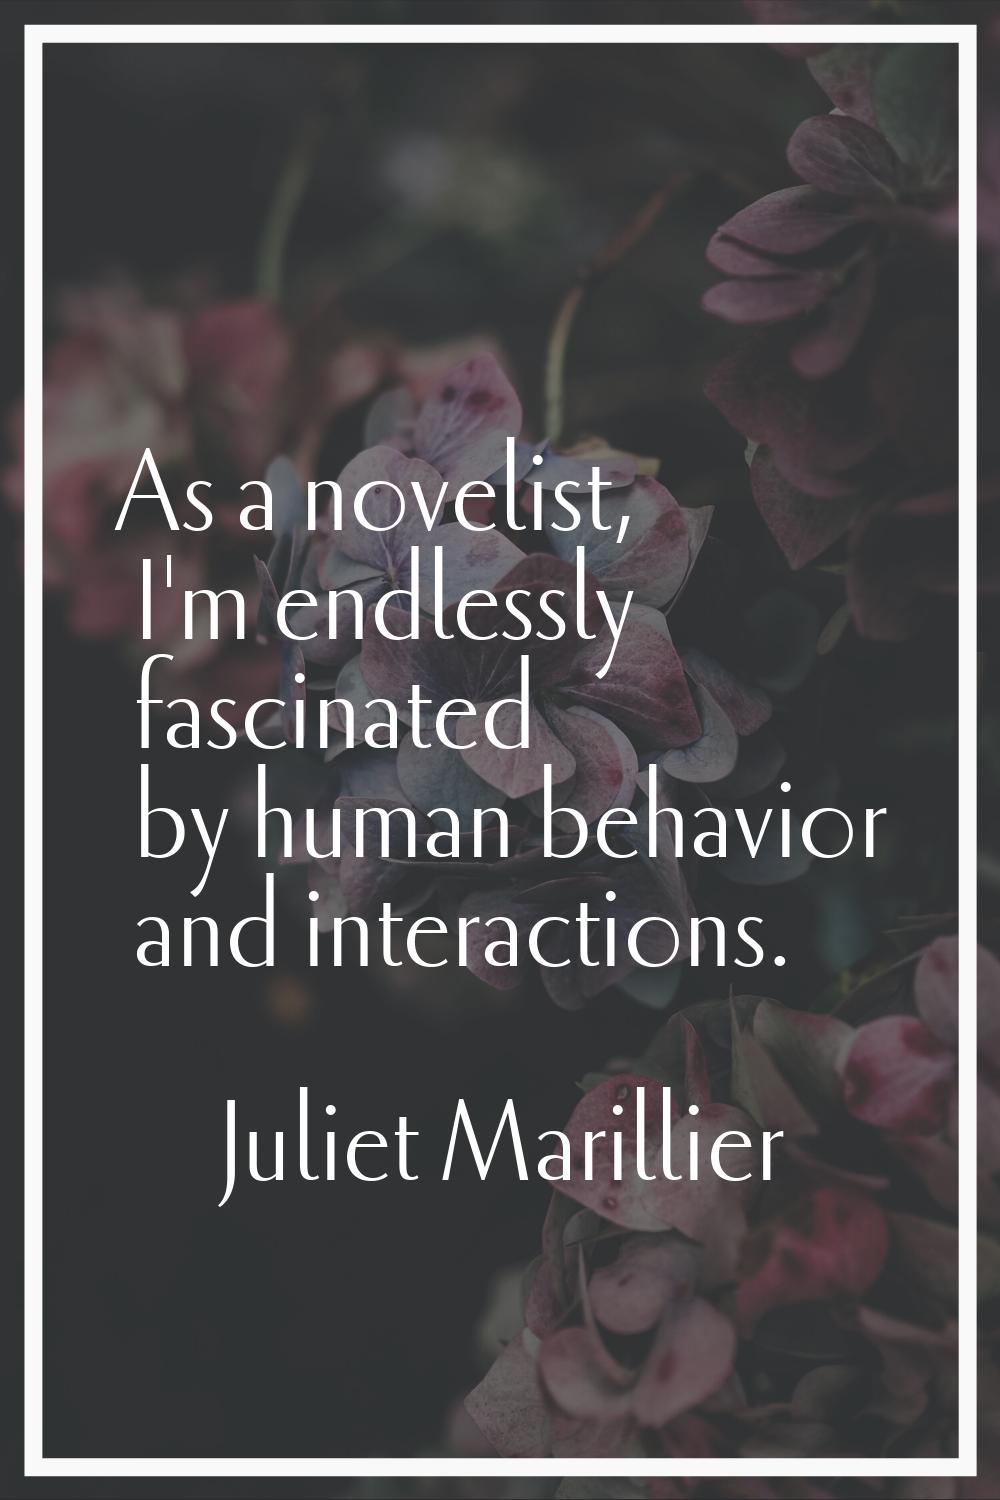 As a novelist, I'm endlessly fascinated by human behavior and interactions.